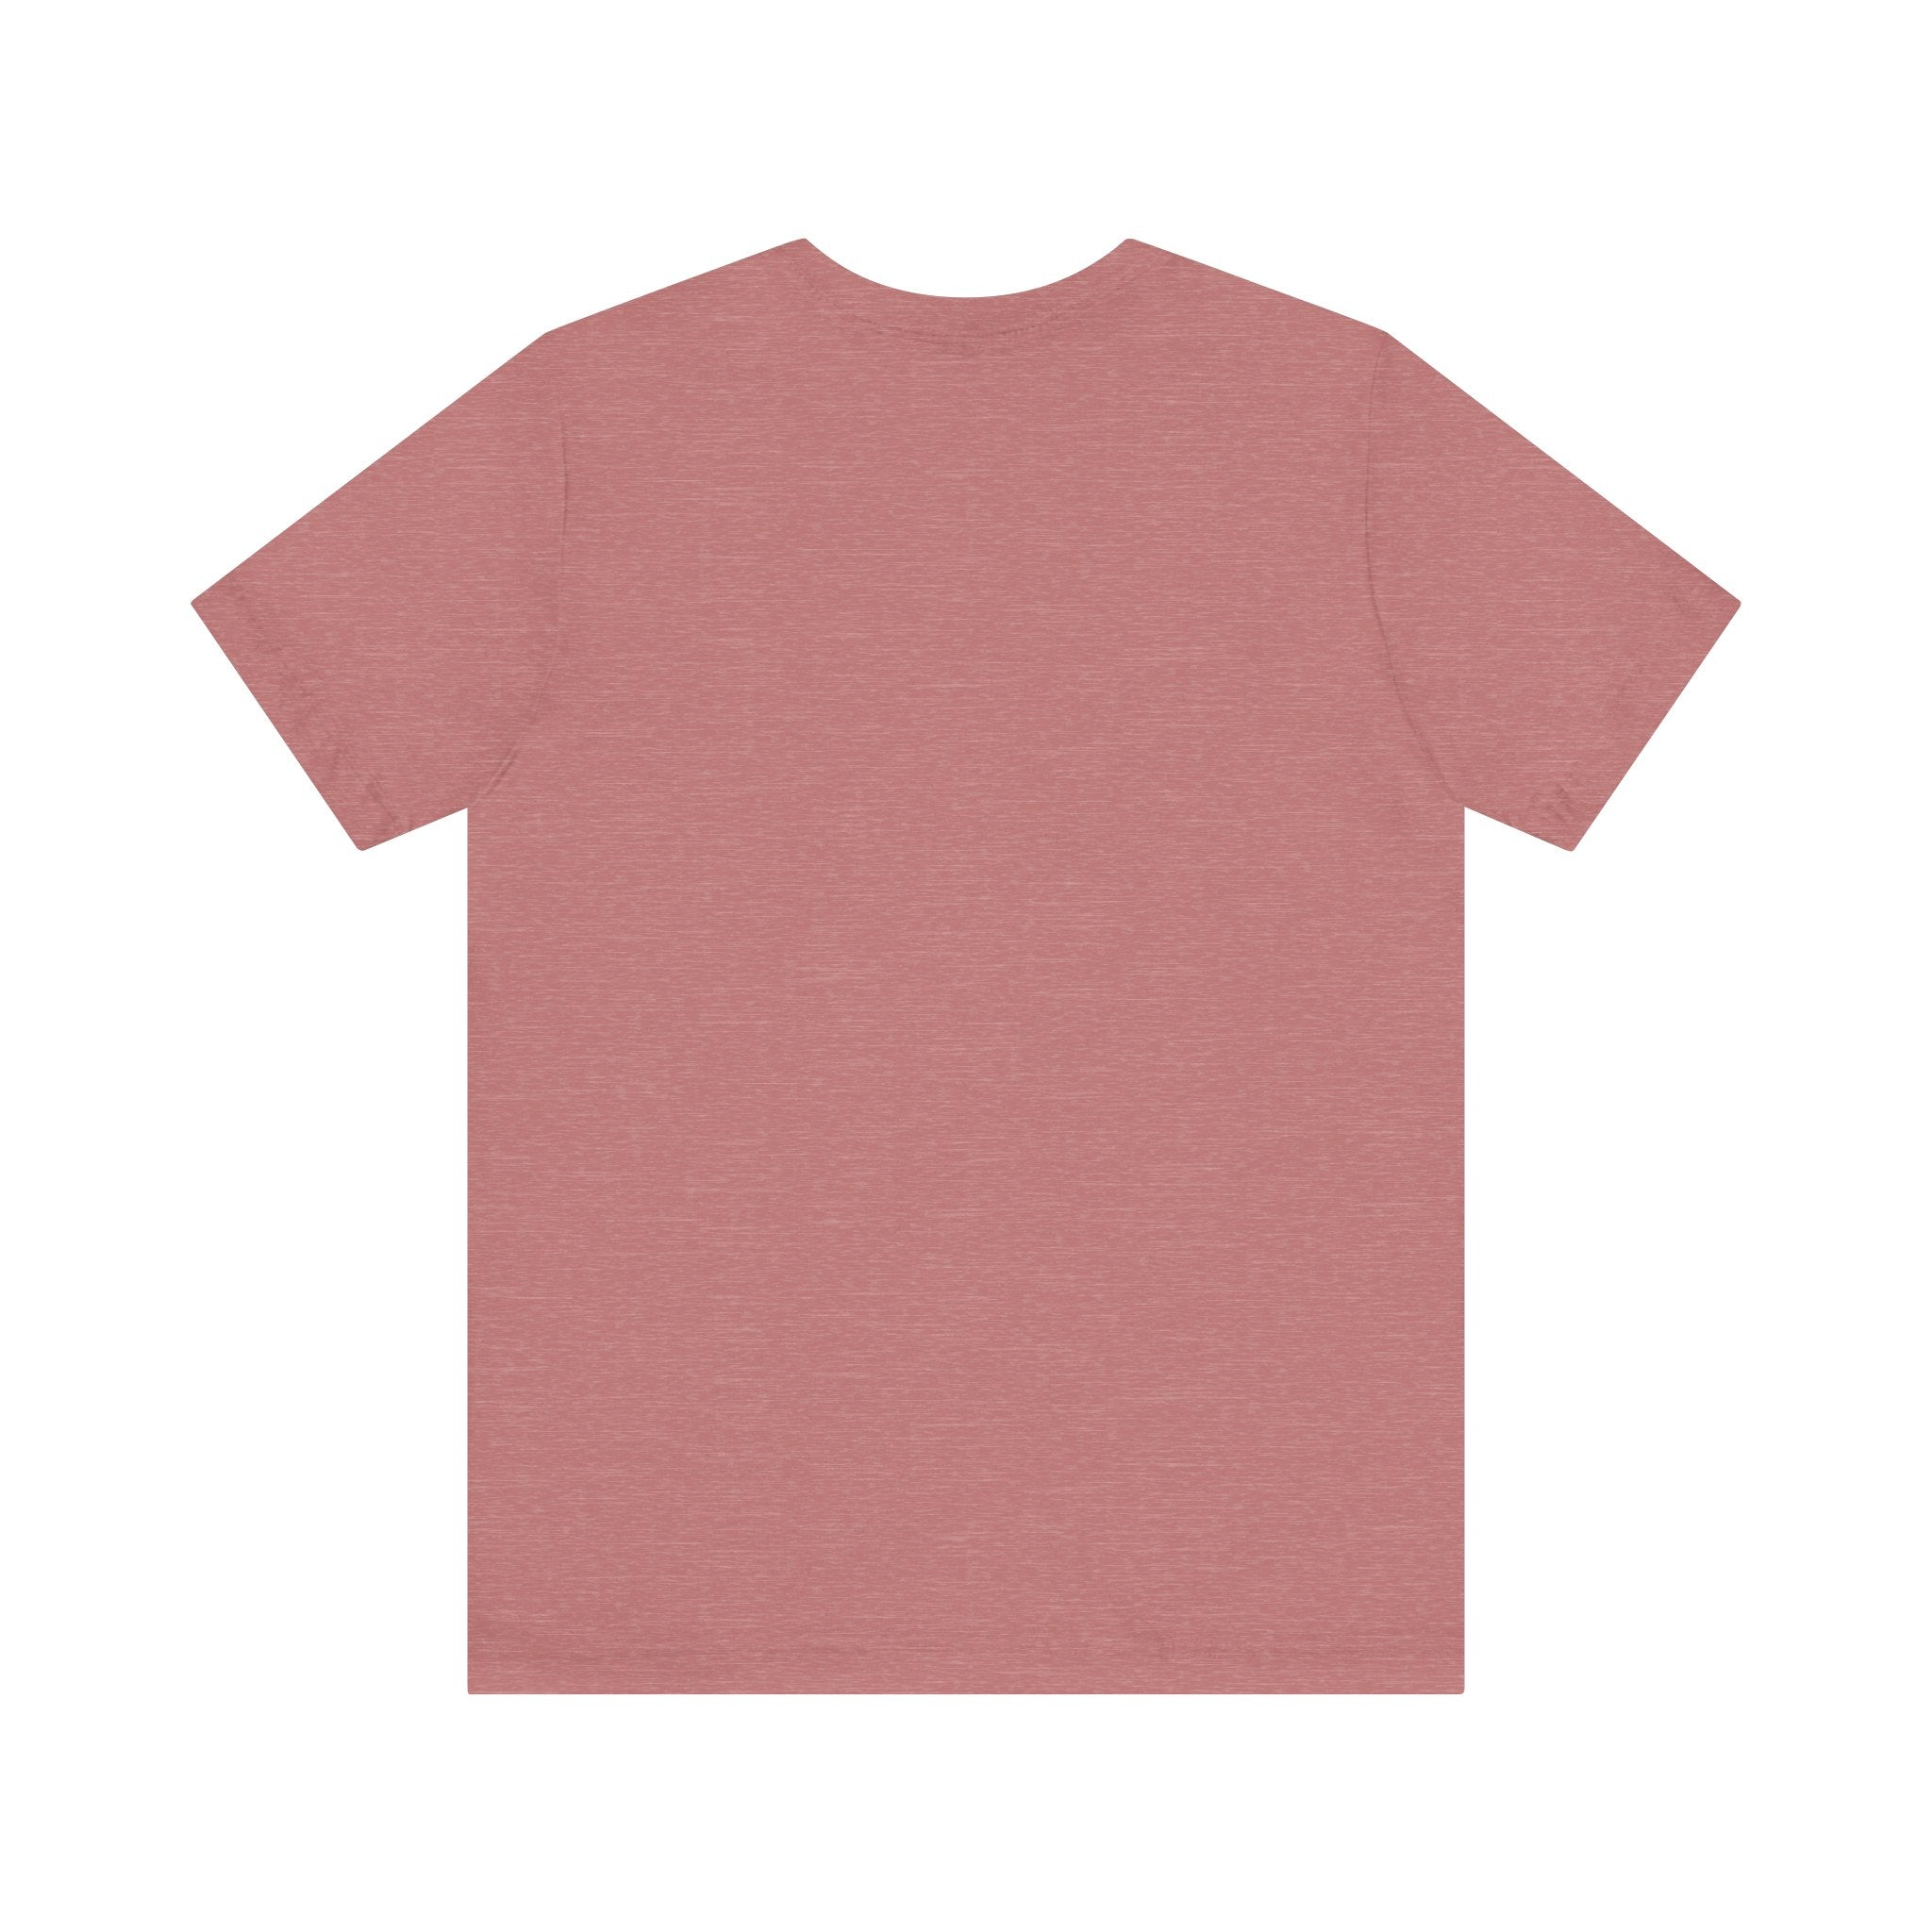 Funcle heathered red t-shirt displayed on a white background.